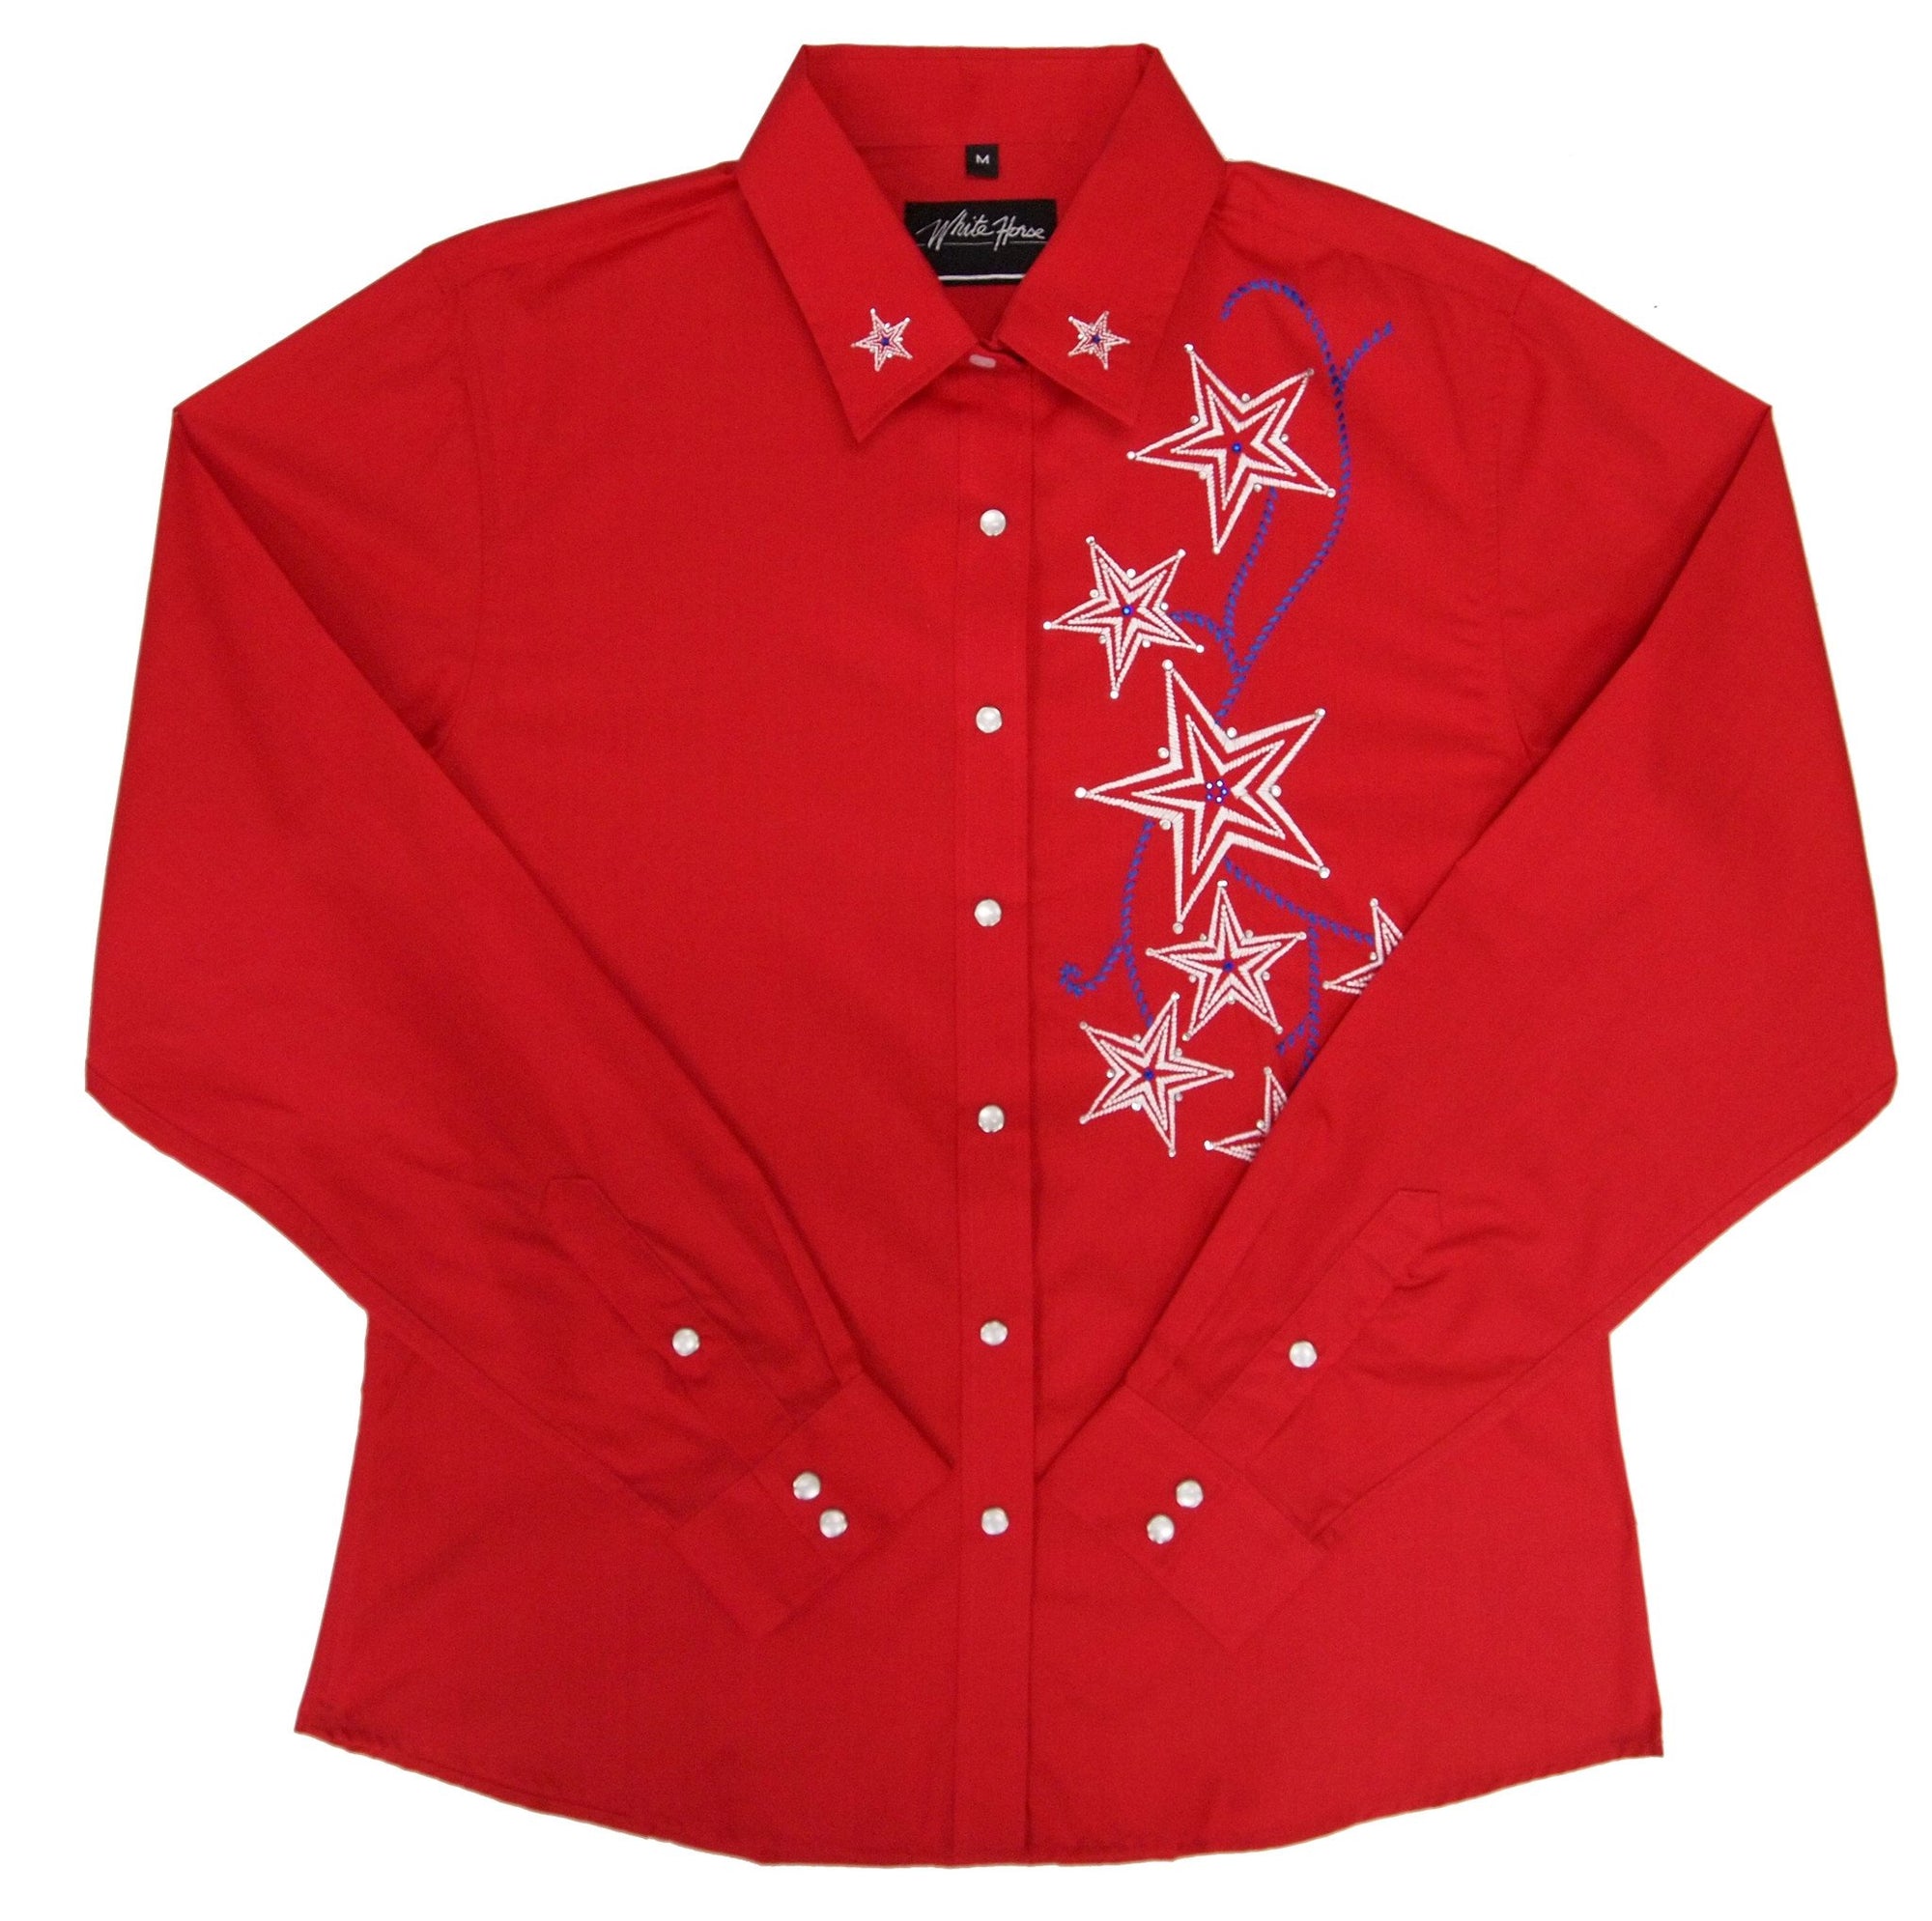 White Horse Apparel Women's Western Shirt with Star Burst Red